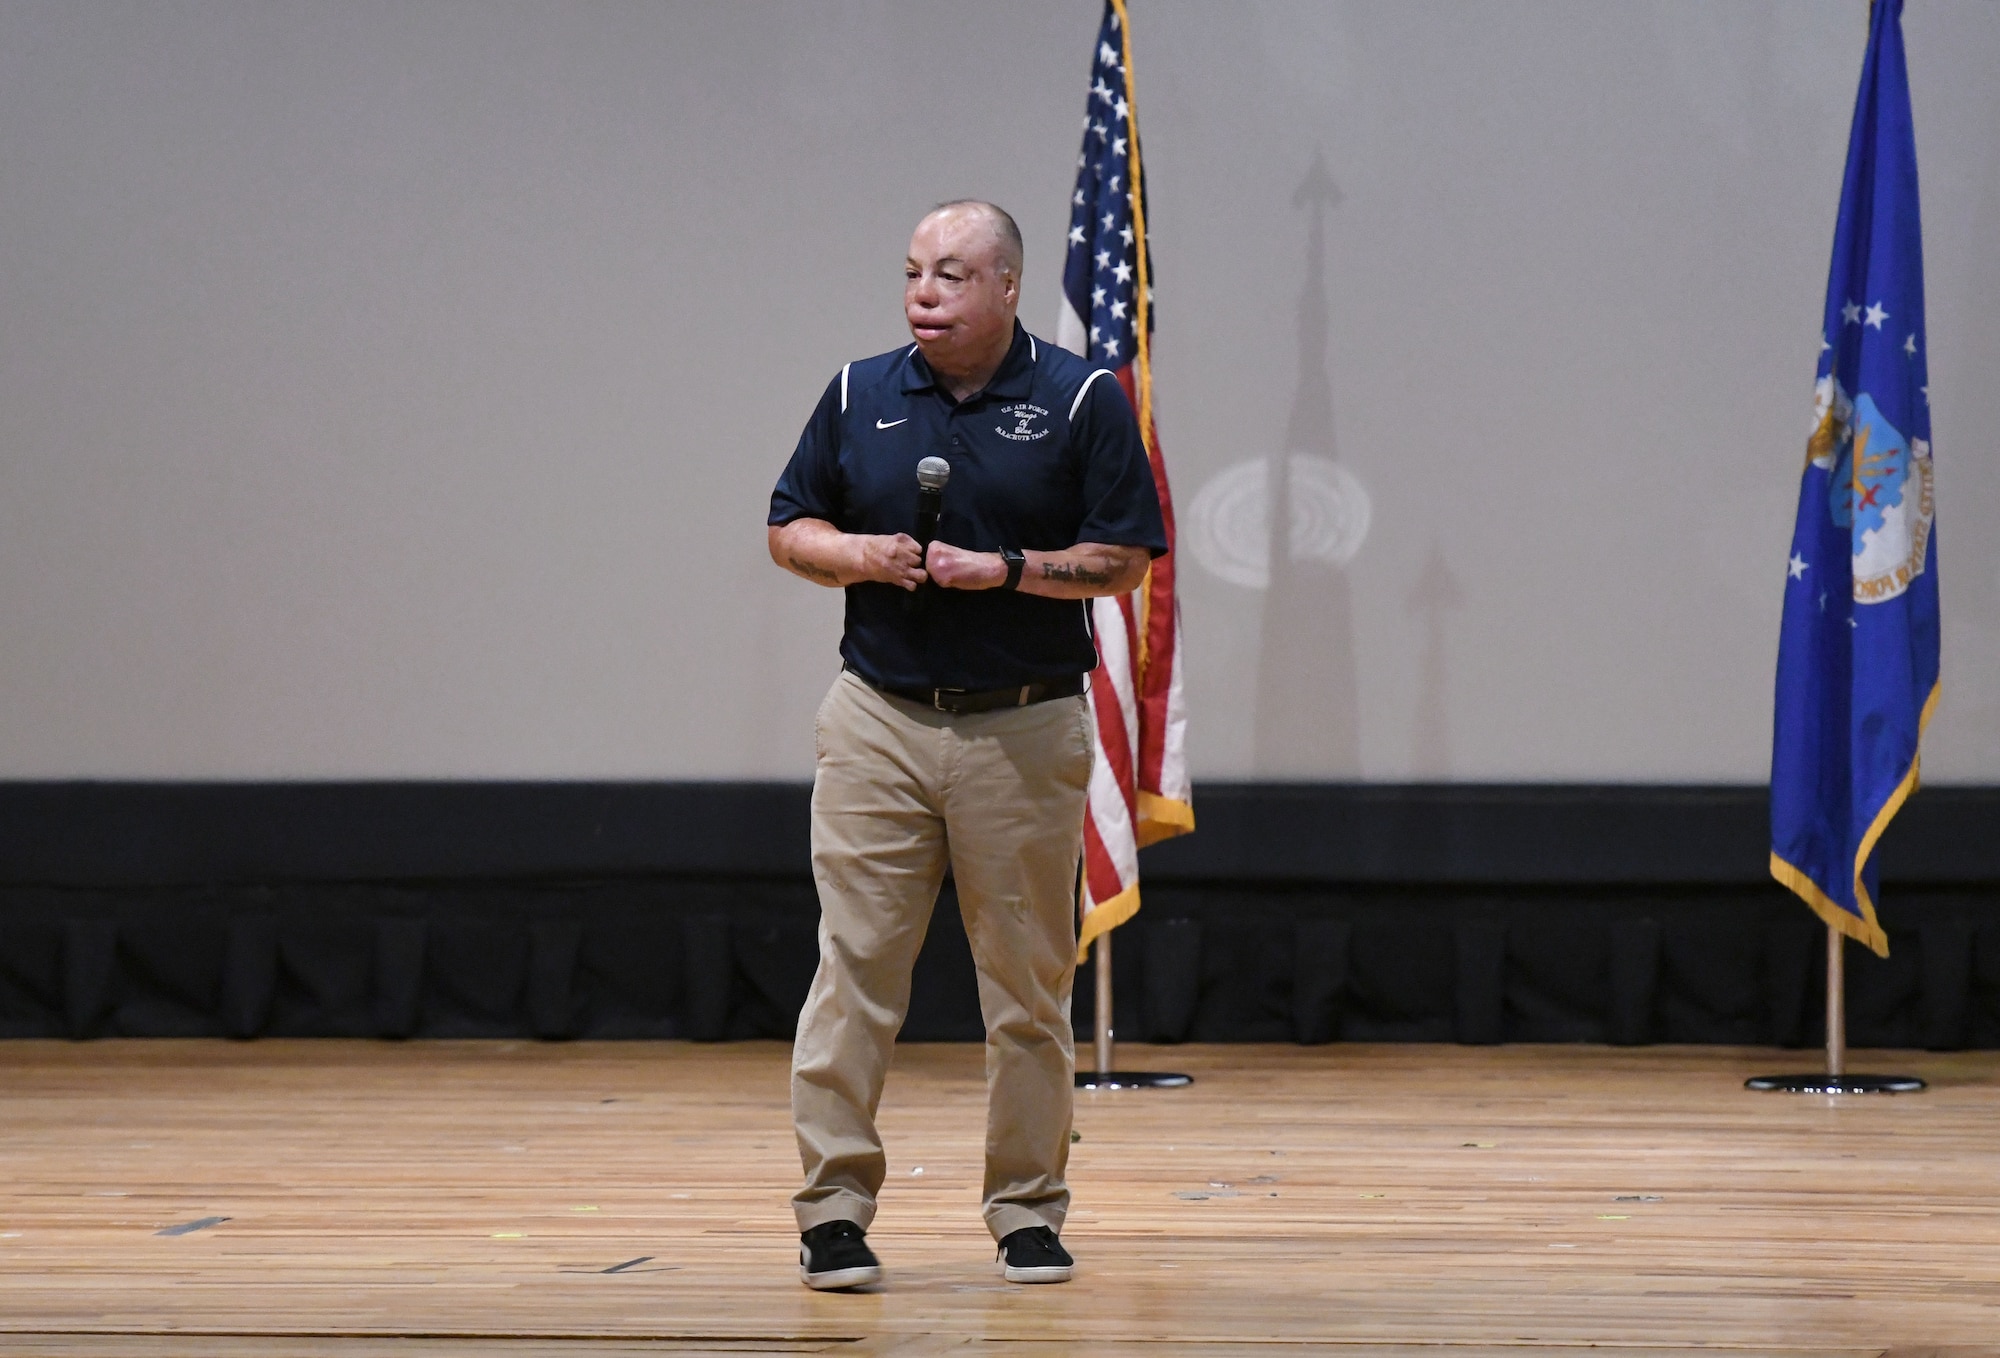 U.S. Air Force Senior Master Sgt. Israel Del Toro, 98th Flying Training Squadron accelerated freefall training program superintendent, U.S. Air Force Academy, Colorado, speaks to 81st Training Group Airmen at the Welch Theater at Keesler Air Force Base, Mississippi, Sept. 21, 2018. Del Toro was injured in Afghanistan on Dec. 4, 2005, and became the first 100 percent disabled Airman to reenlist in the Air Force on Feb. 8, 2010. He also received the first field promotion in the Air Force. (U.S. Air Force photo by Kemberly Groue)